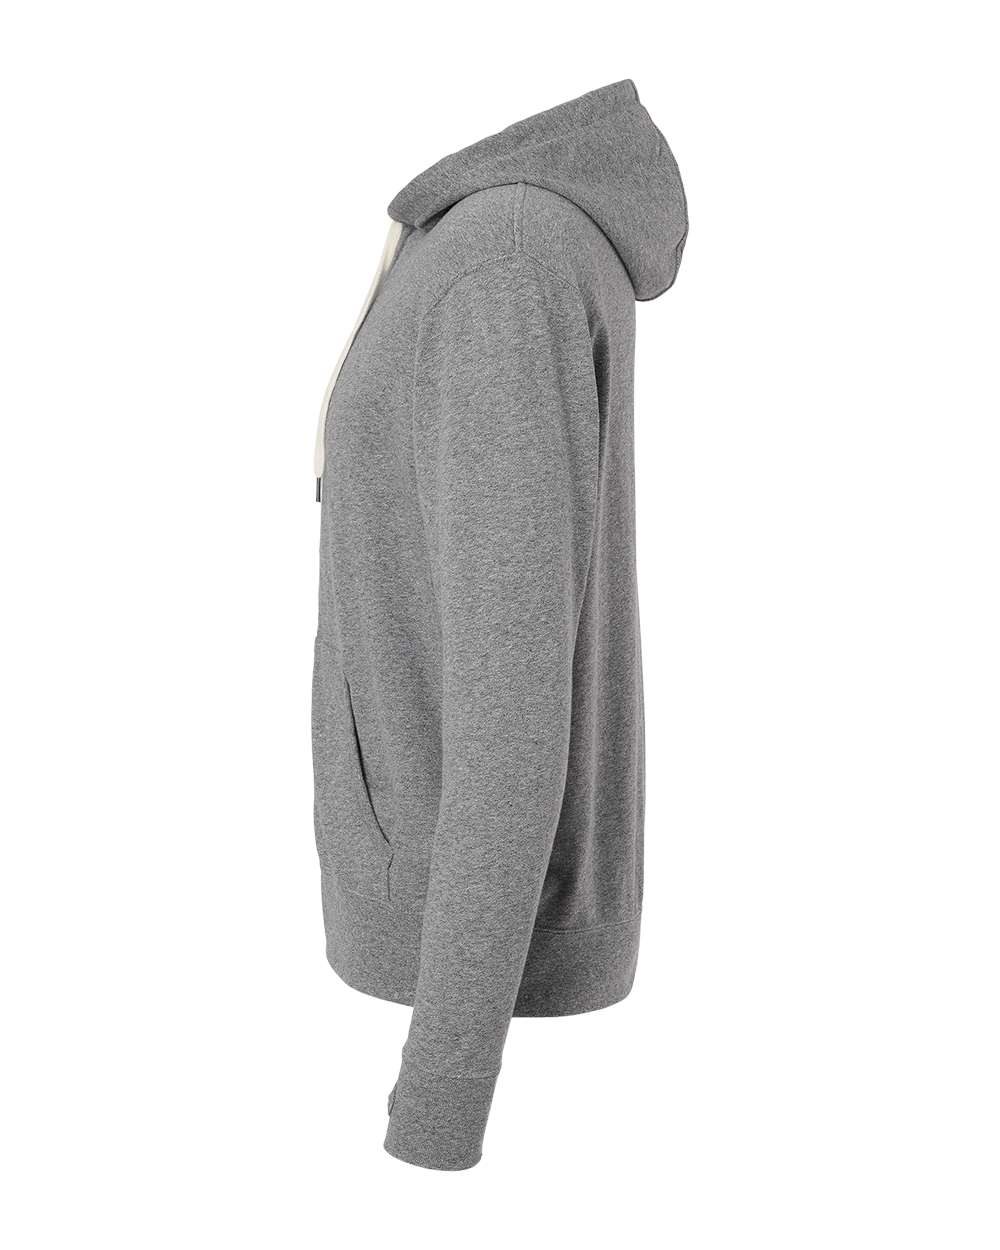 Independent Trading Co. PRM90HTZ - Unisex French Terry Heathered Hooded  Full-Zip Sweatshirt